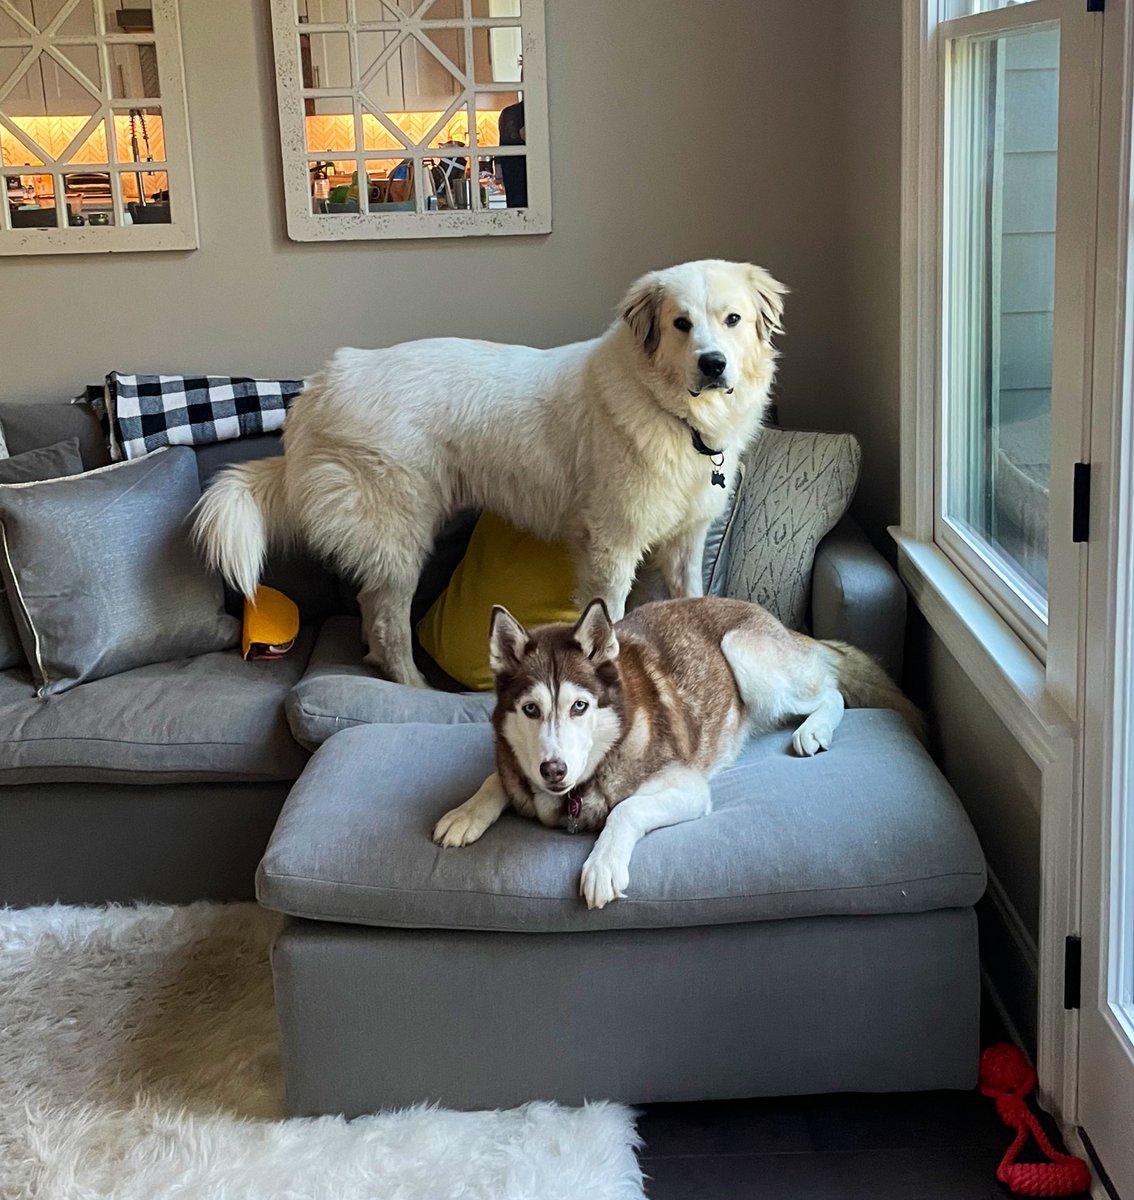 What? Unless you have treats move along. We are just playing hide the taco. Very innocently. 😂🐾♥️ #DontWannaTacoAboutIt 🌮#momjokes #dogsoftwitter #husky #greatpyrenees